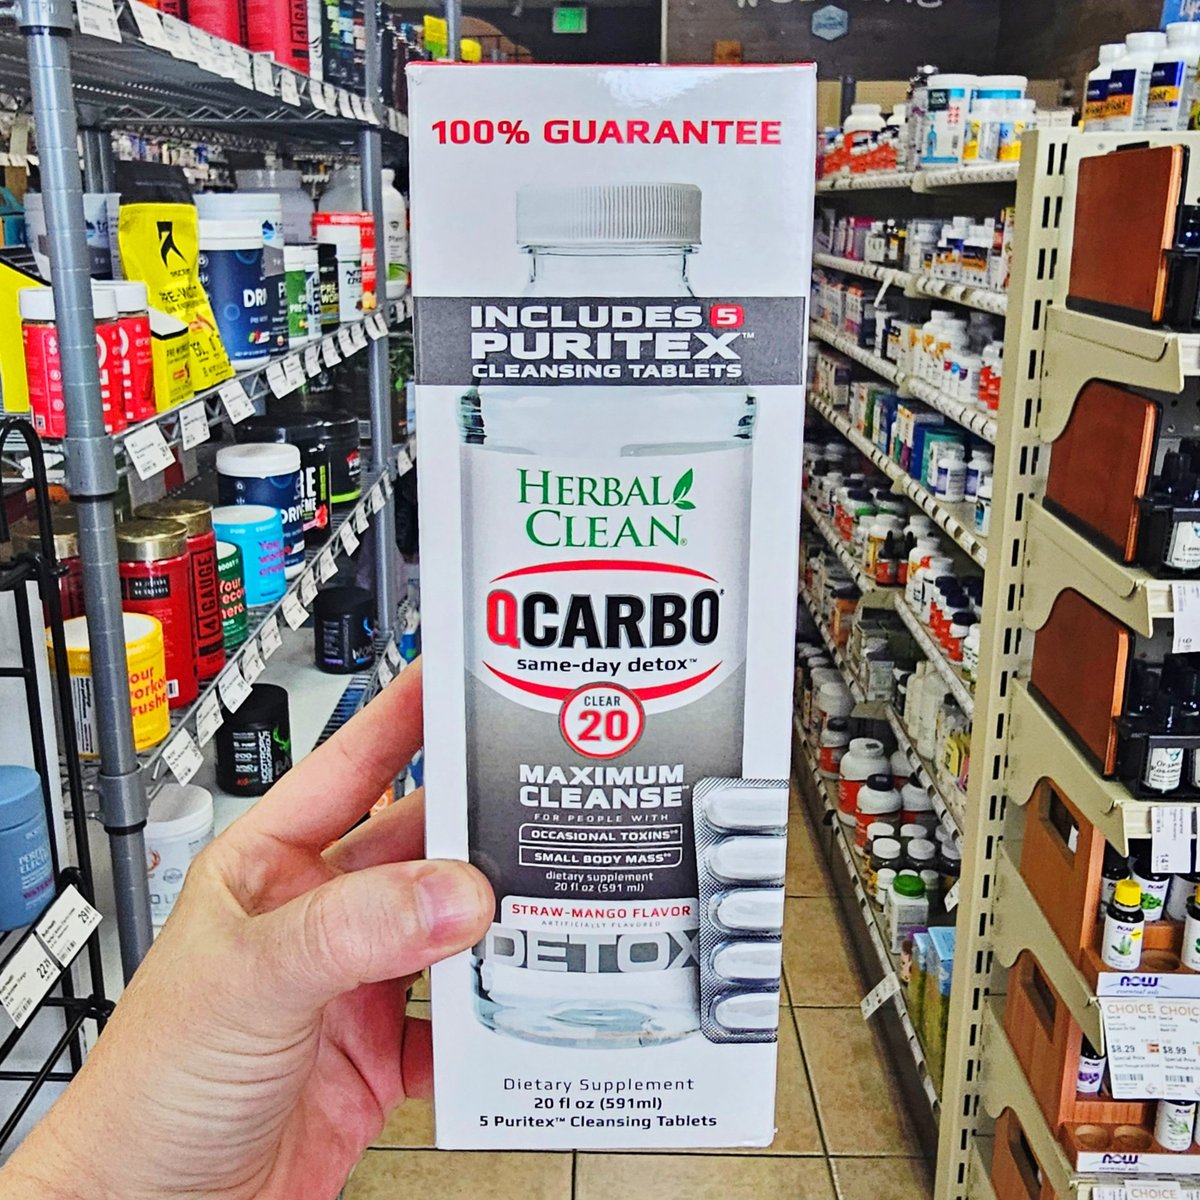 Back by popular request! #HerbalClean QCarbo Maximum Cleanse! Such a popular and powerful detox formula with both a liquid and tablets to help. 

 #AlchePharmaNaturals #supplements #vitaminstore #HealthFoodStore #Buellton #Nipomo #Orcutt #supplementstore #detox #cleanse